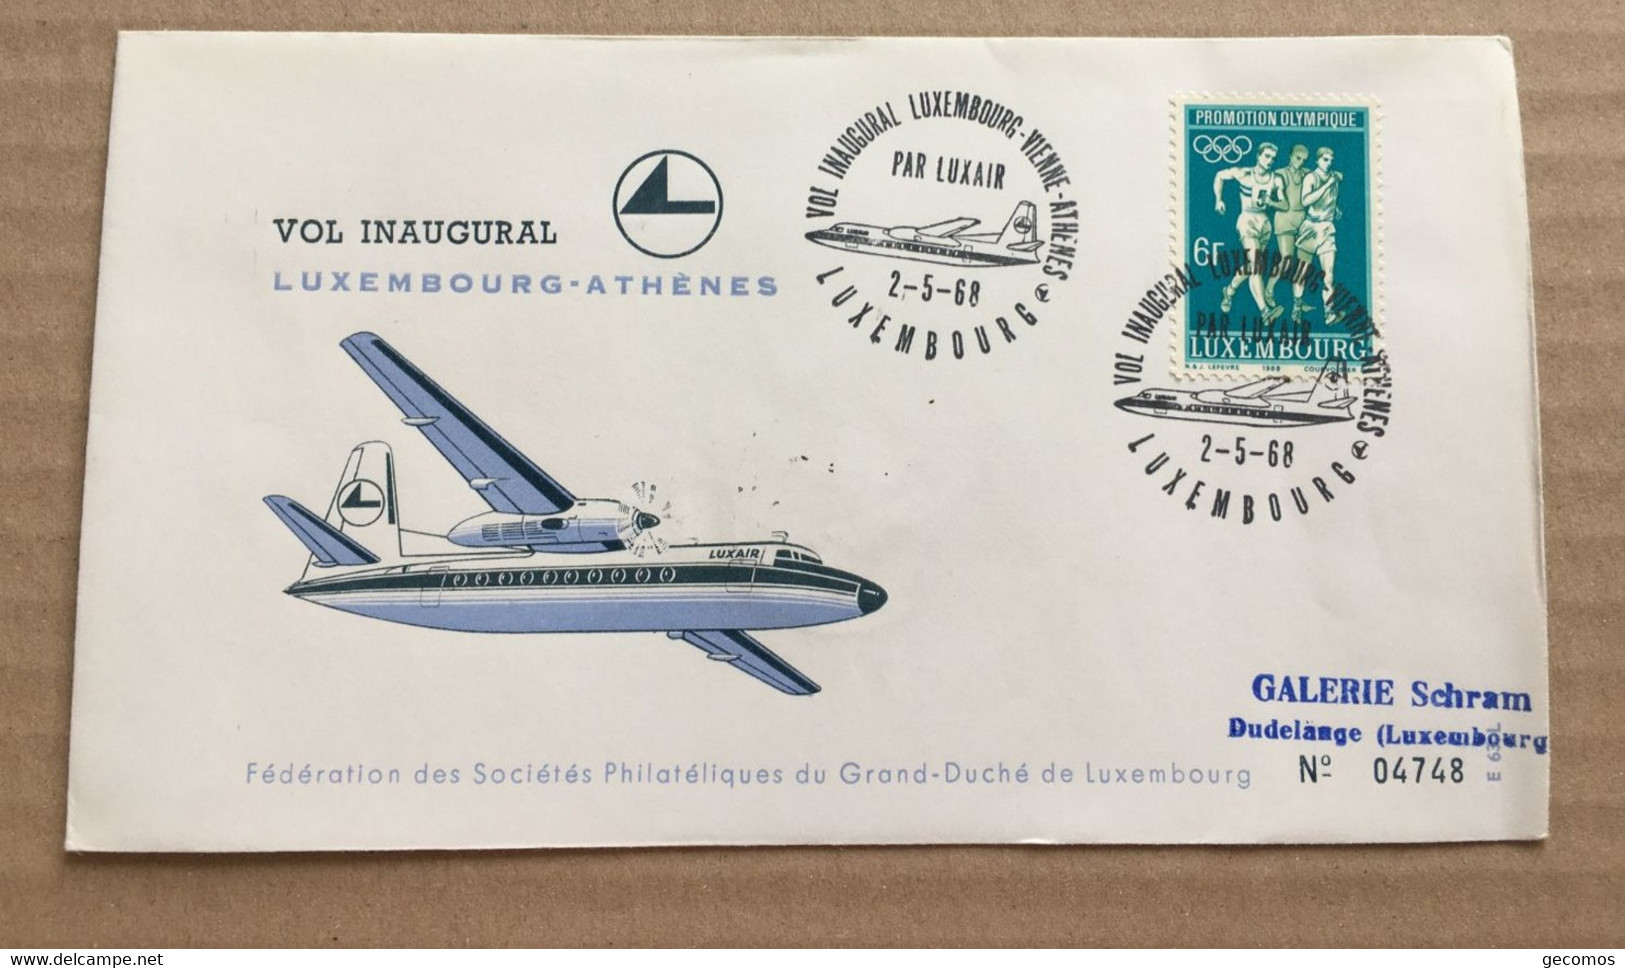 VOL INAUGURAL LUXEMBOURG-ATHENES 2-5-68 - (Avion LUXAIR) - Timbre Promotion Olympique LUXEMBOURG. - Briefe U. Dokumente